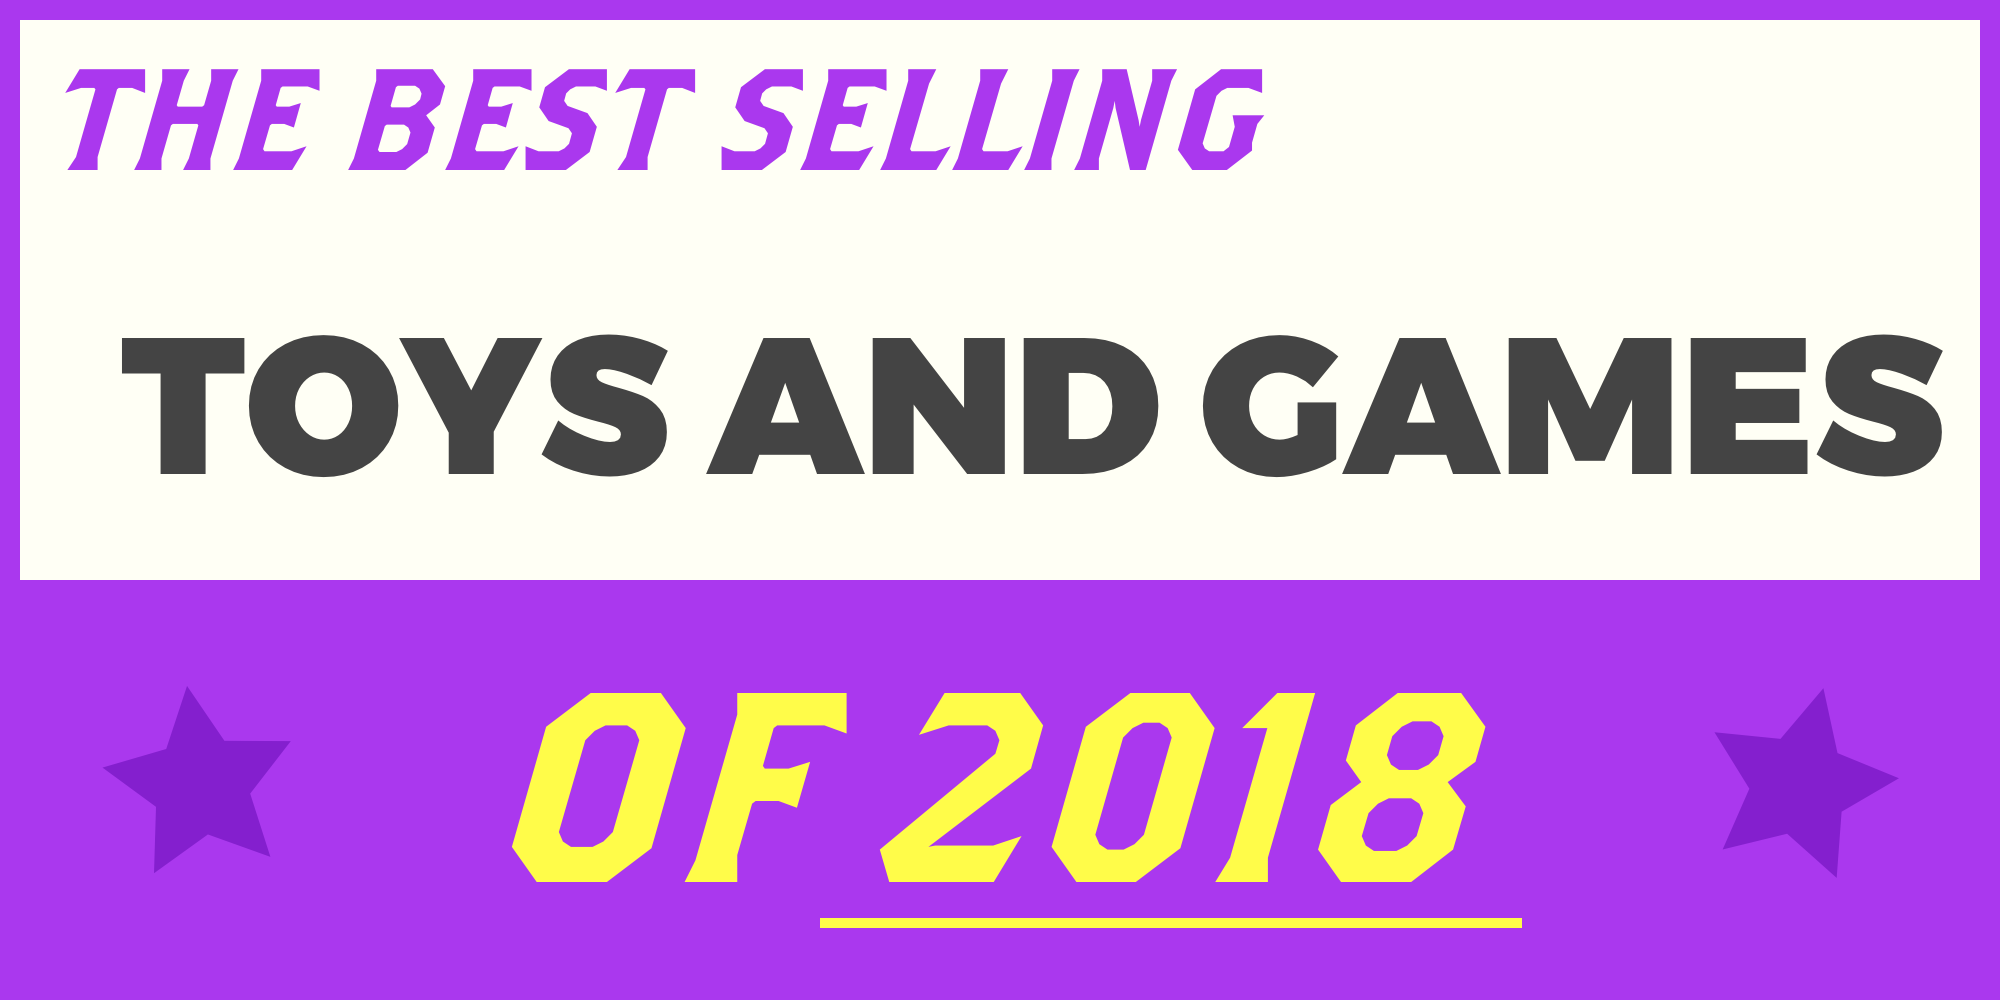 top selling toys 2018